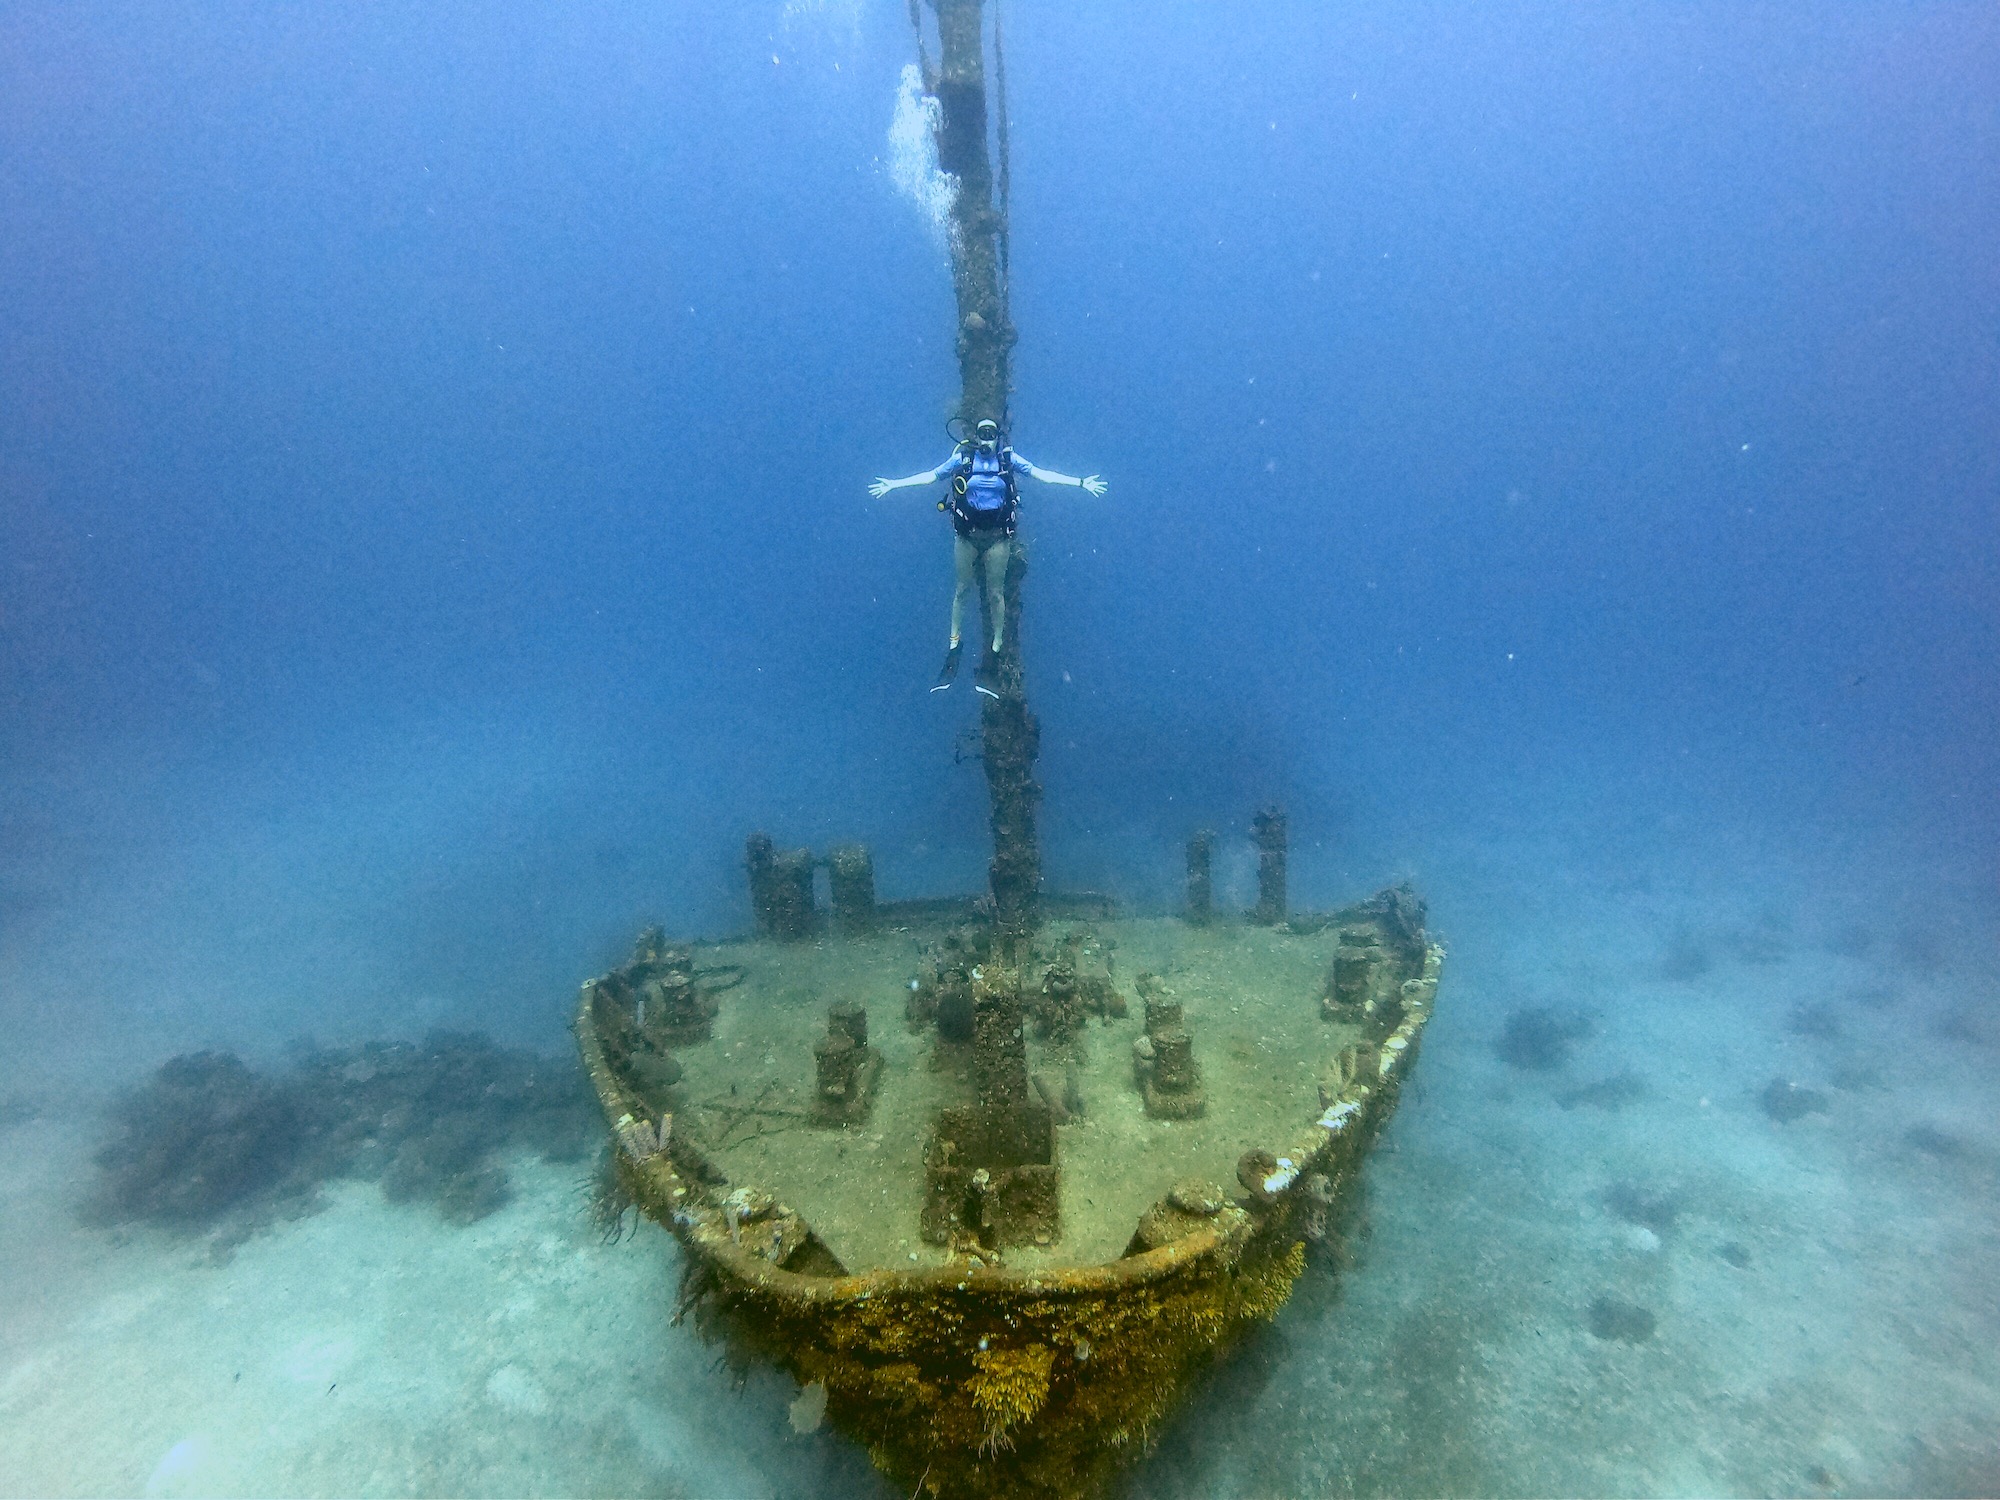 A scuba diver hovering above the El Aguila shipwreck in Roatan, Honduras, a destination that caters to every diver level